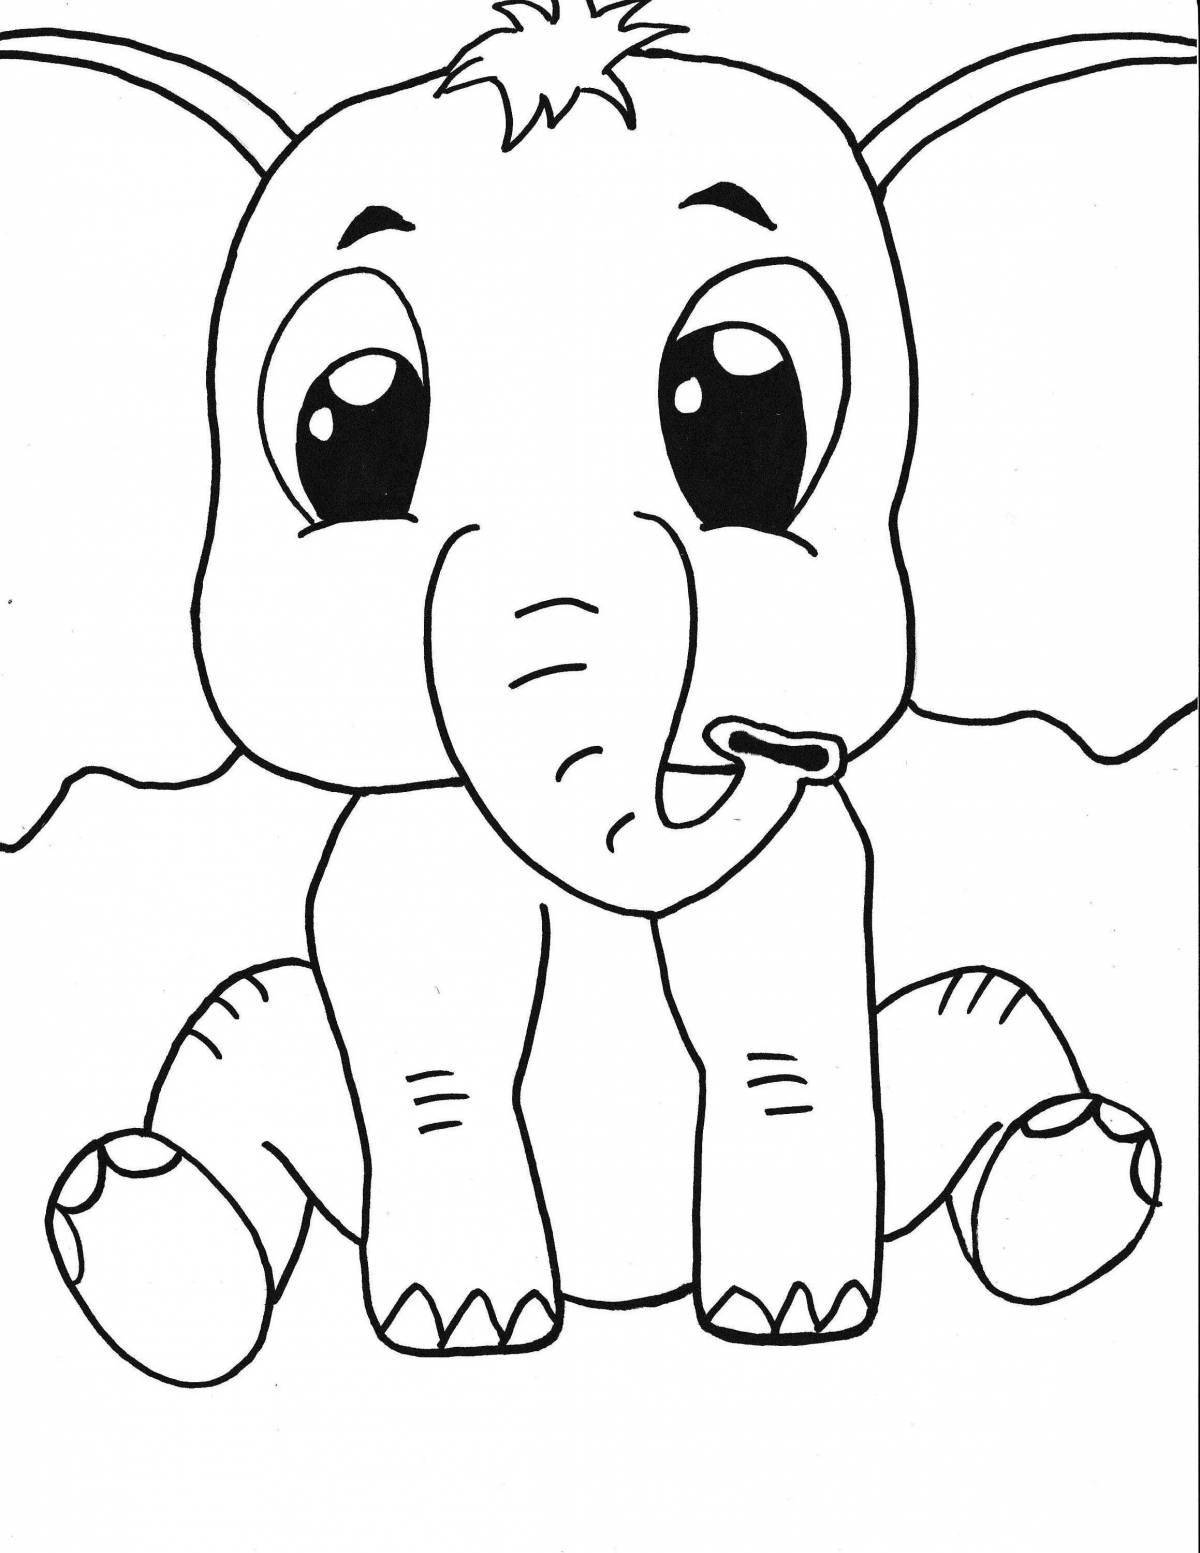 Sparkling elephant coloring book